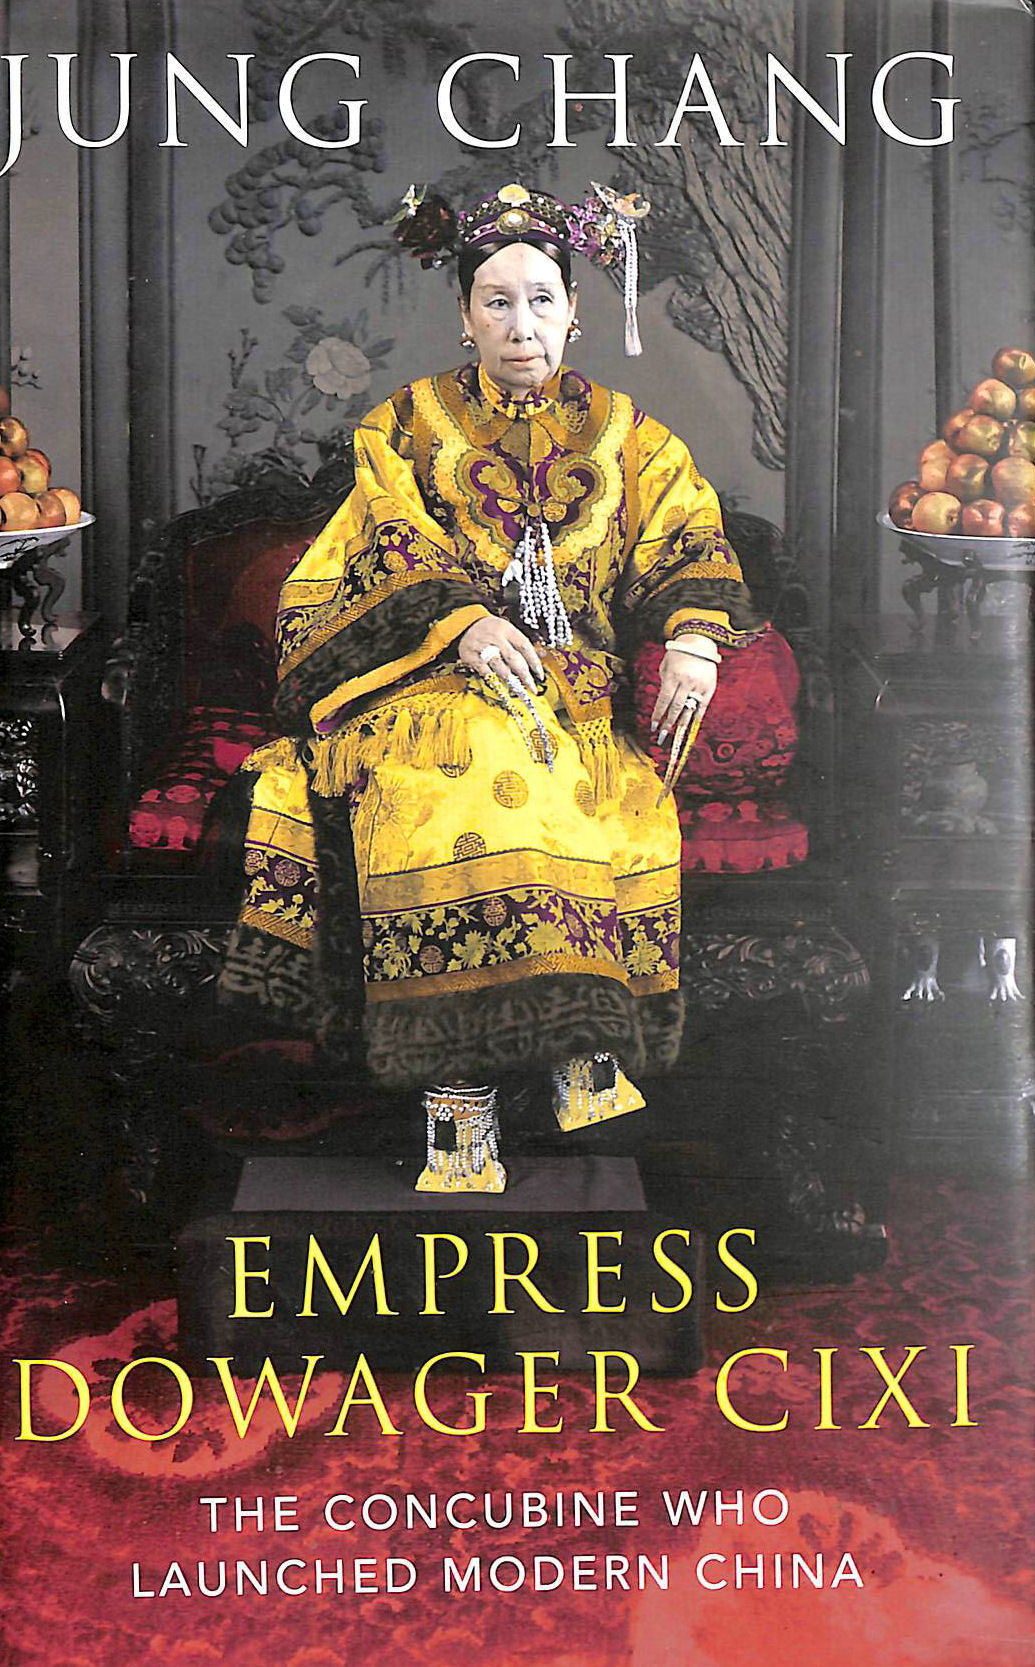 CHANG, JUNG - Empress Dowager Cixi: The Concubine Who Launched Modern China